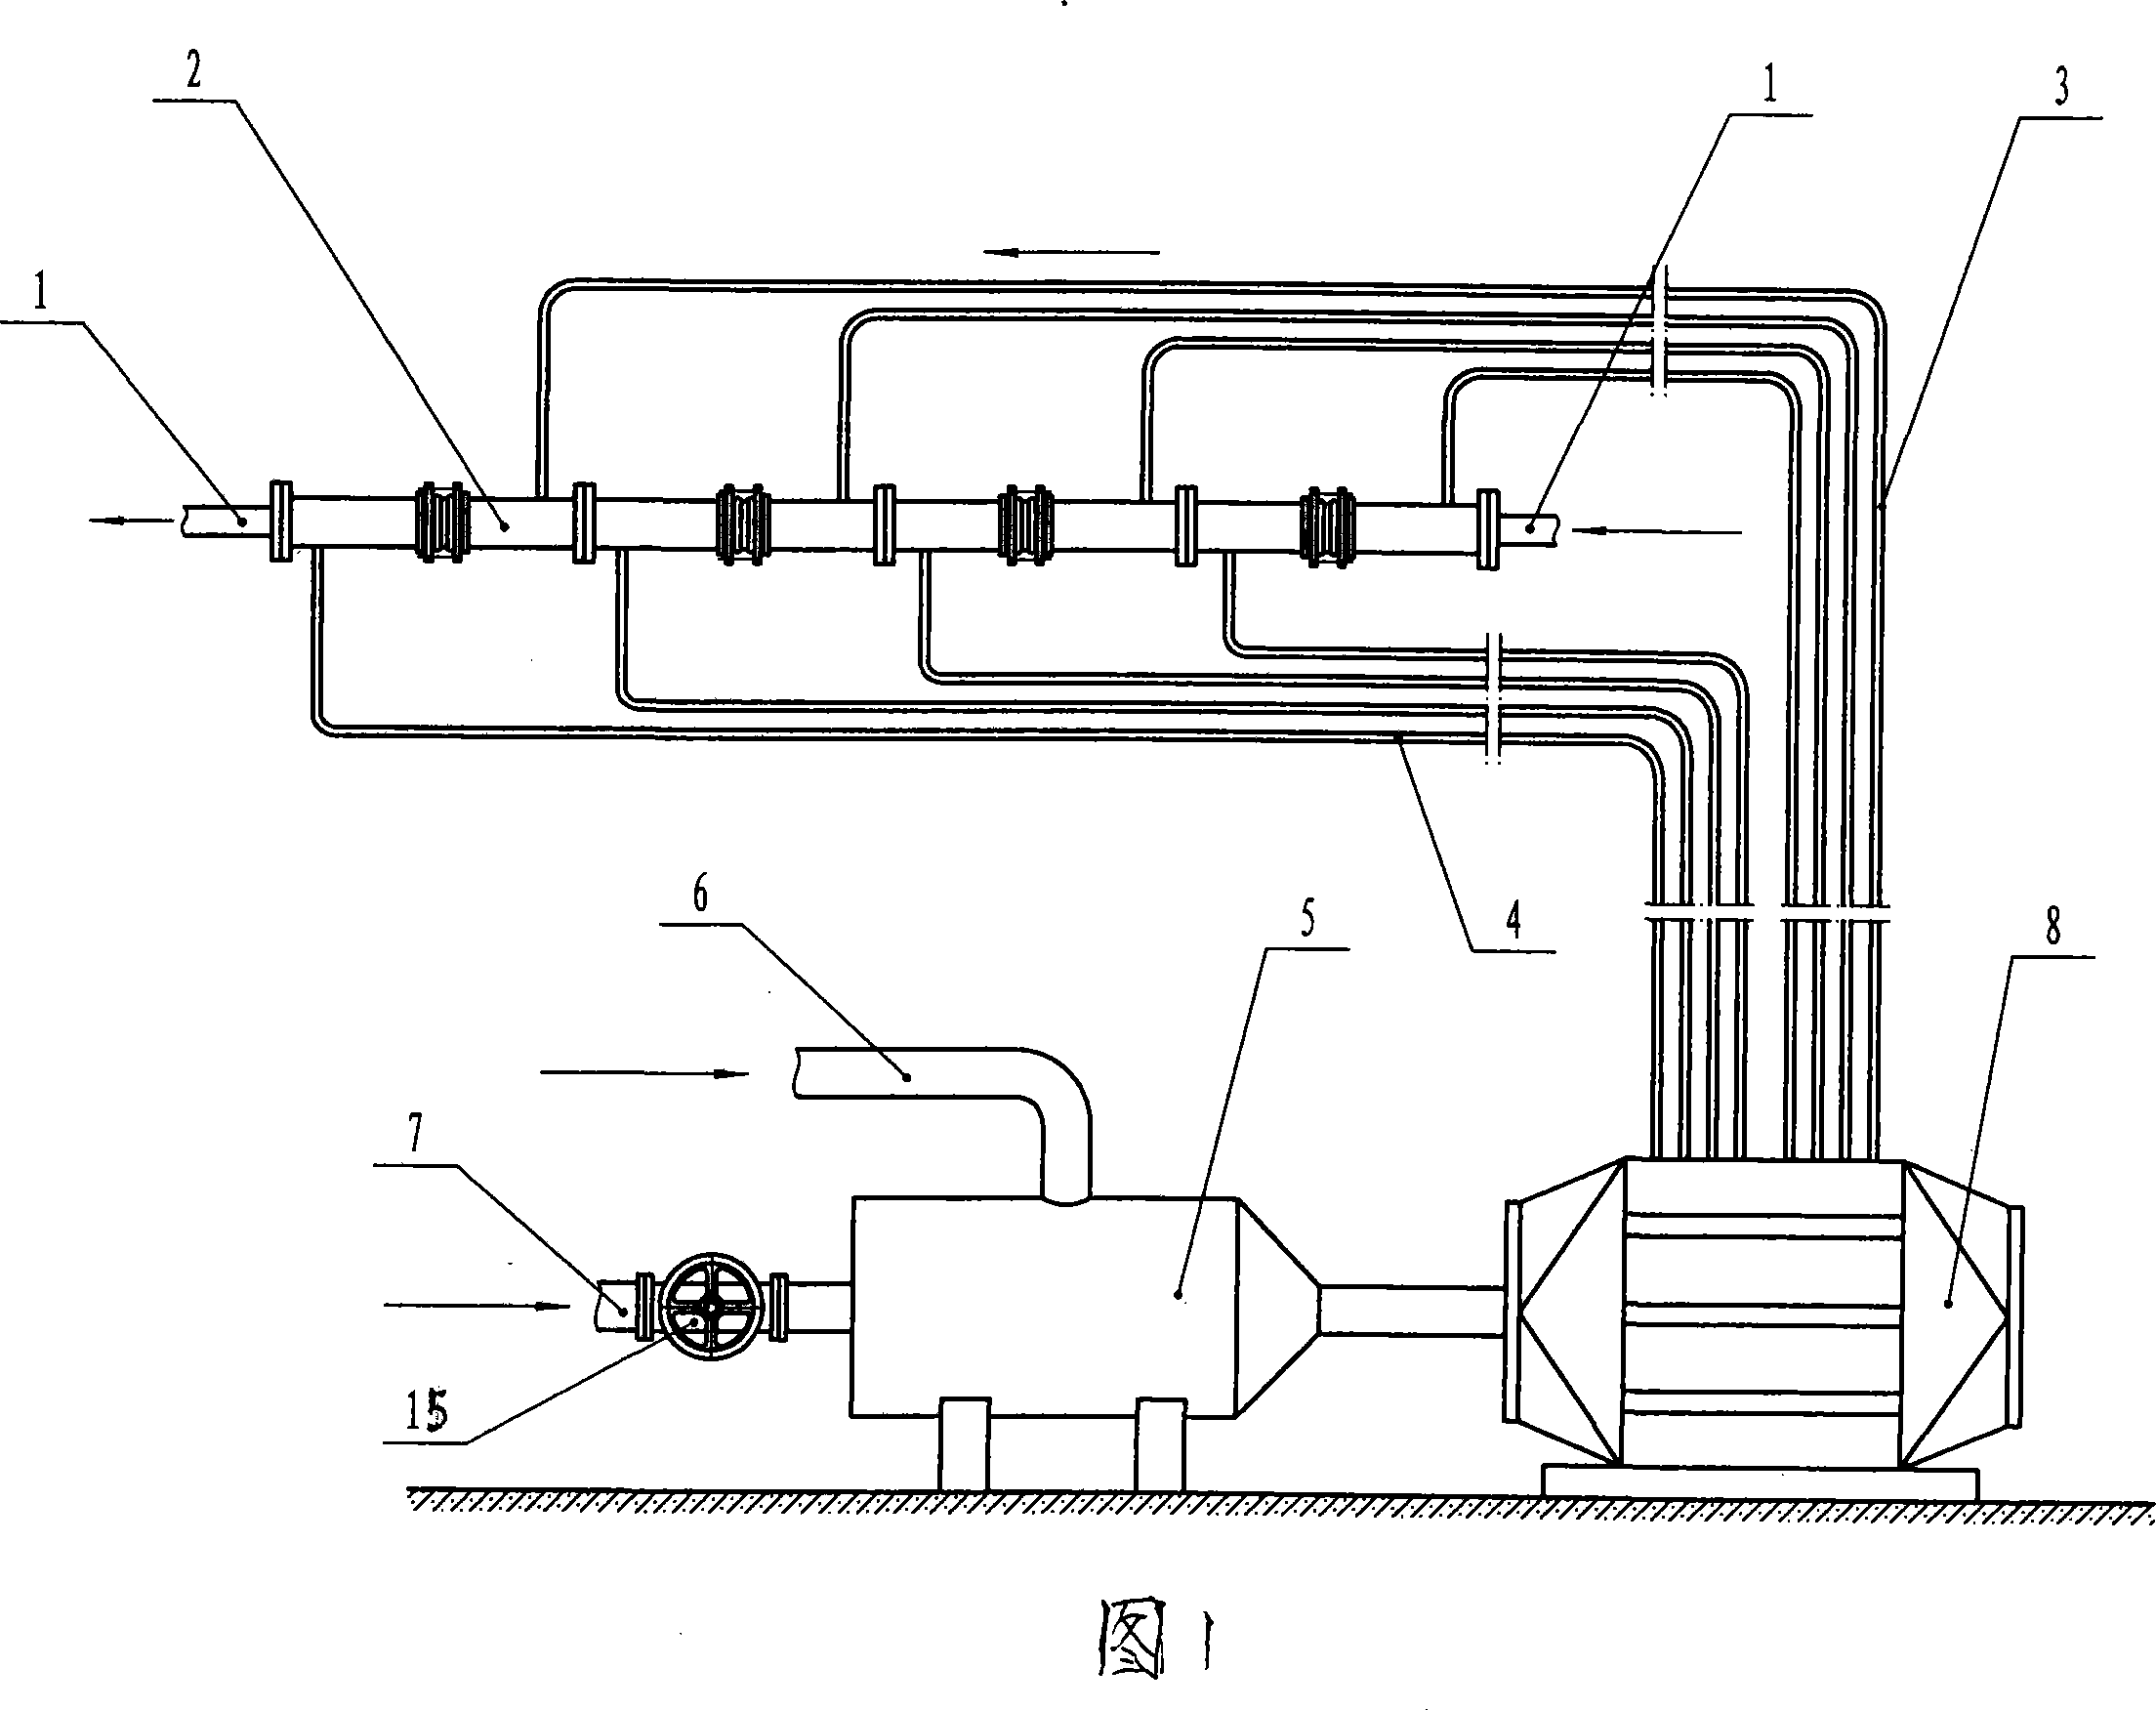 Pre-heating technique of blast furnace before blowing coal powder